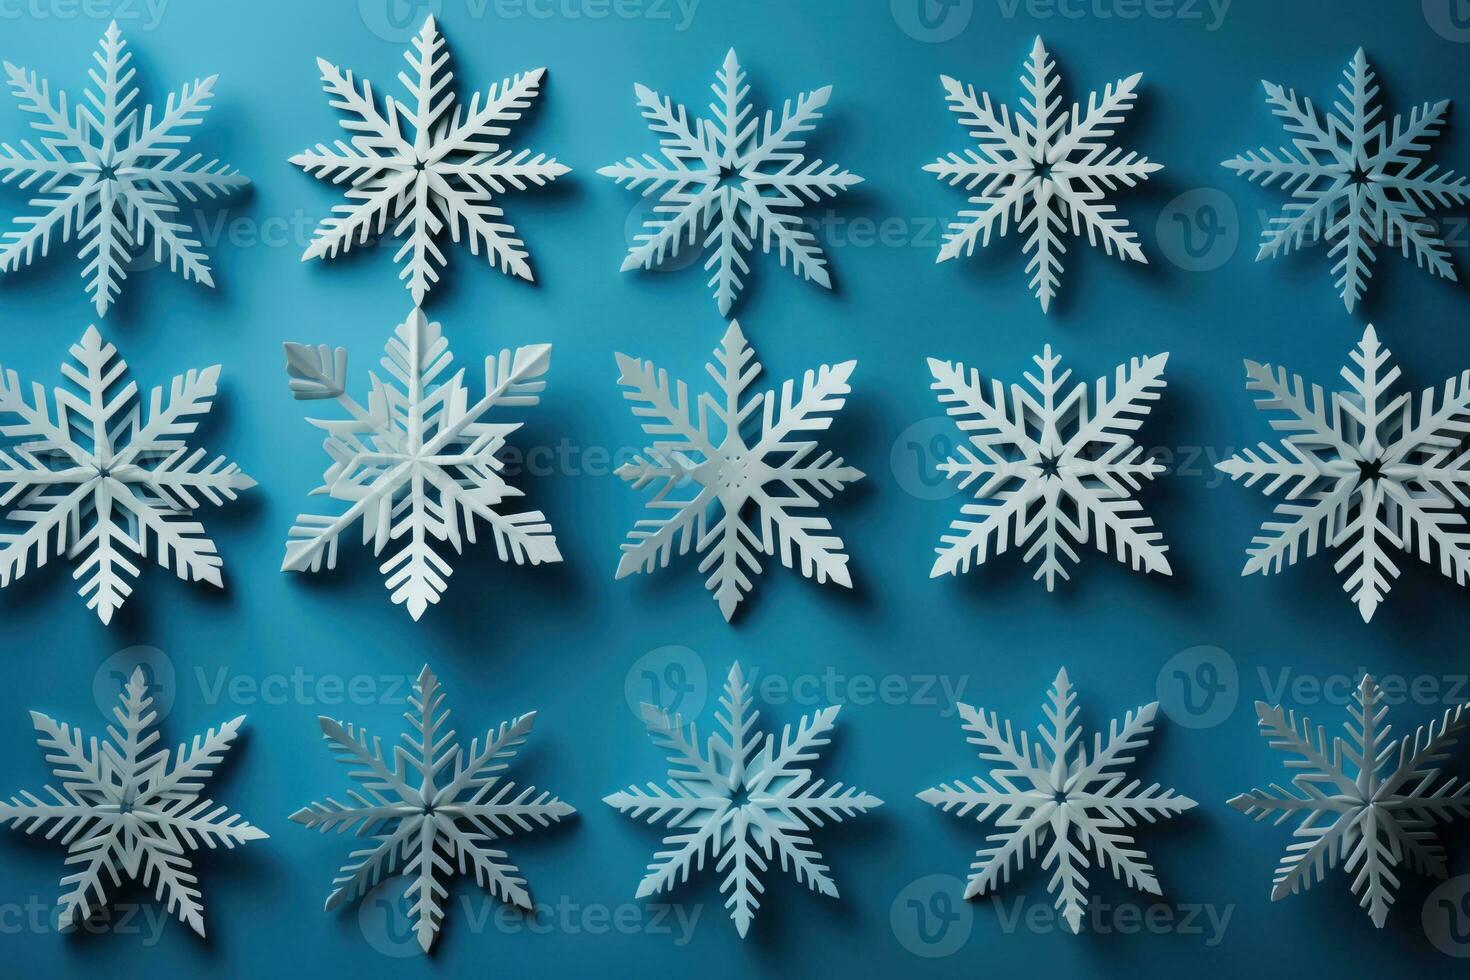 Beautiful DIY paper snowflakes in mid creation isolated on a blue gradient background photo